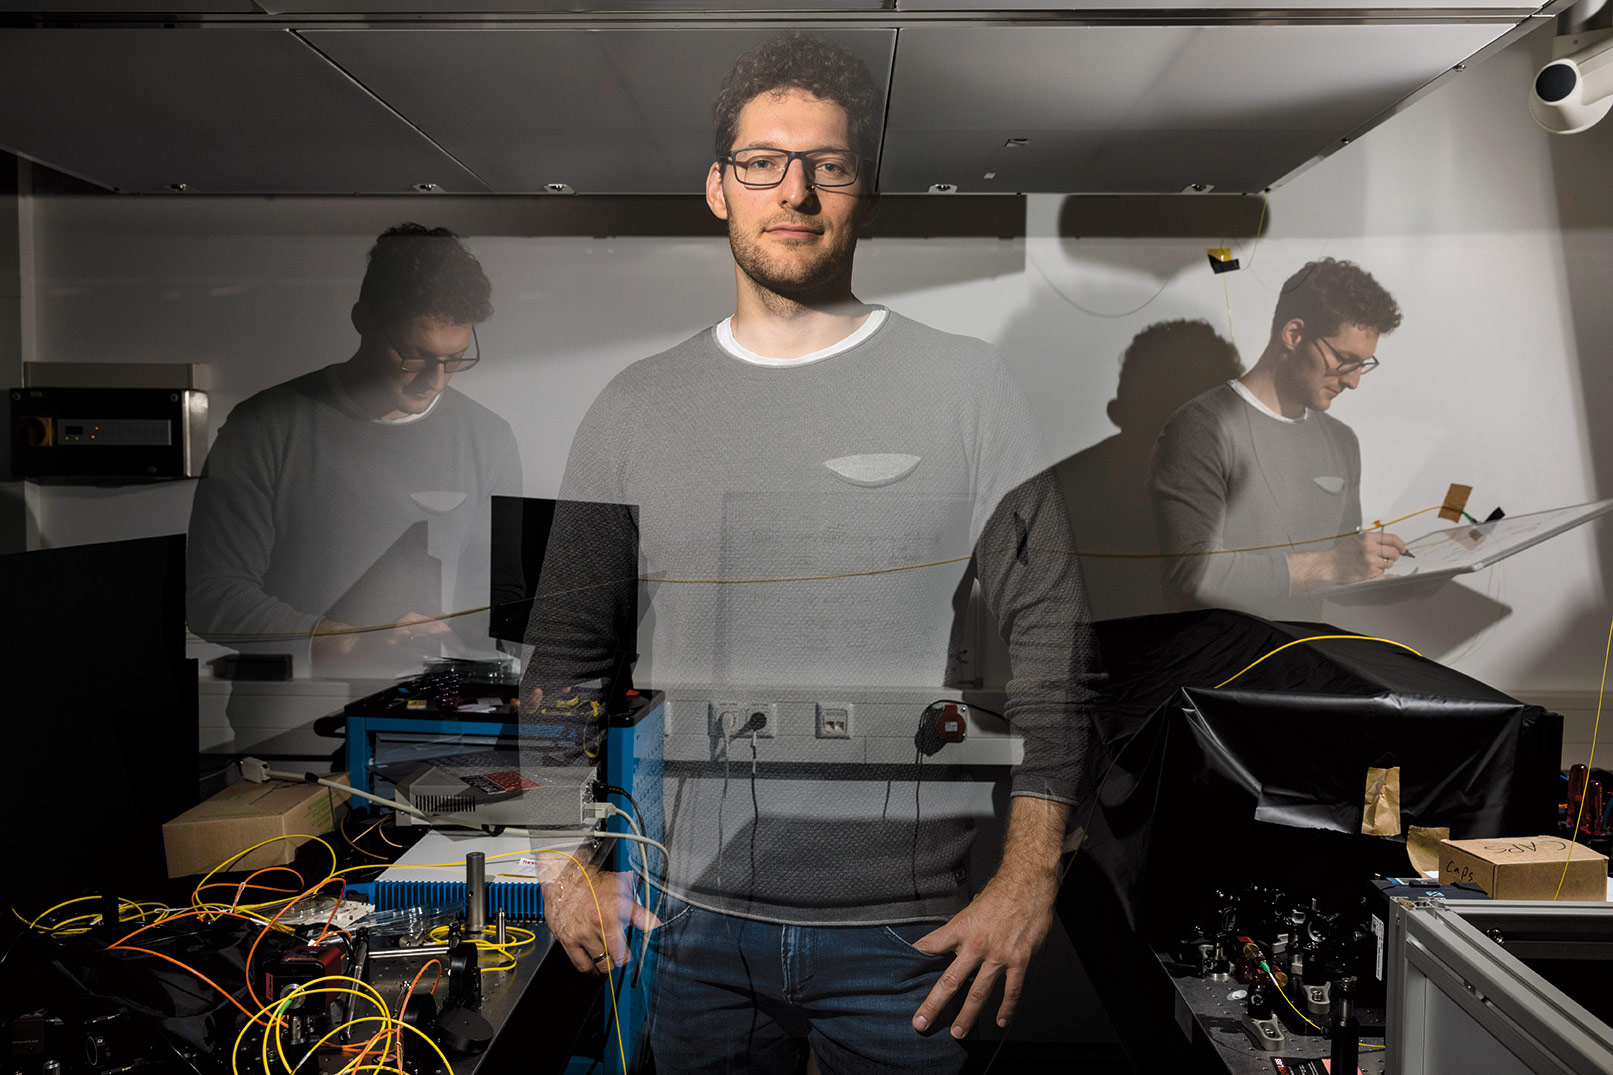 Dr. Markus Gräfe and his team are working with entangled photons to make the invisible visible.